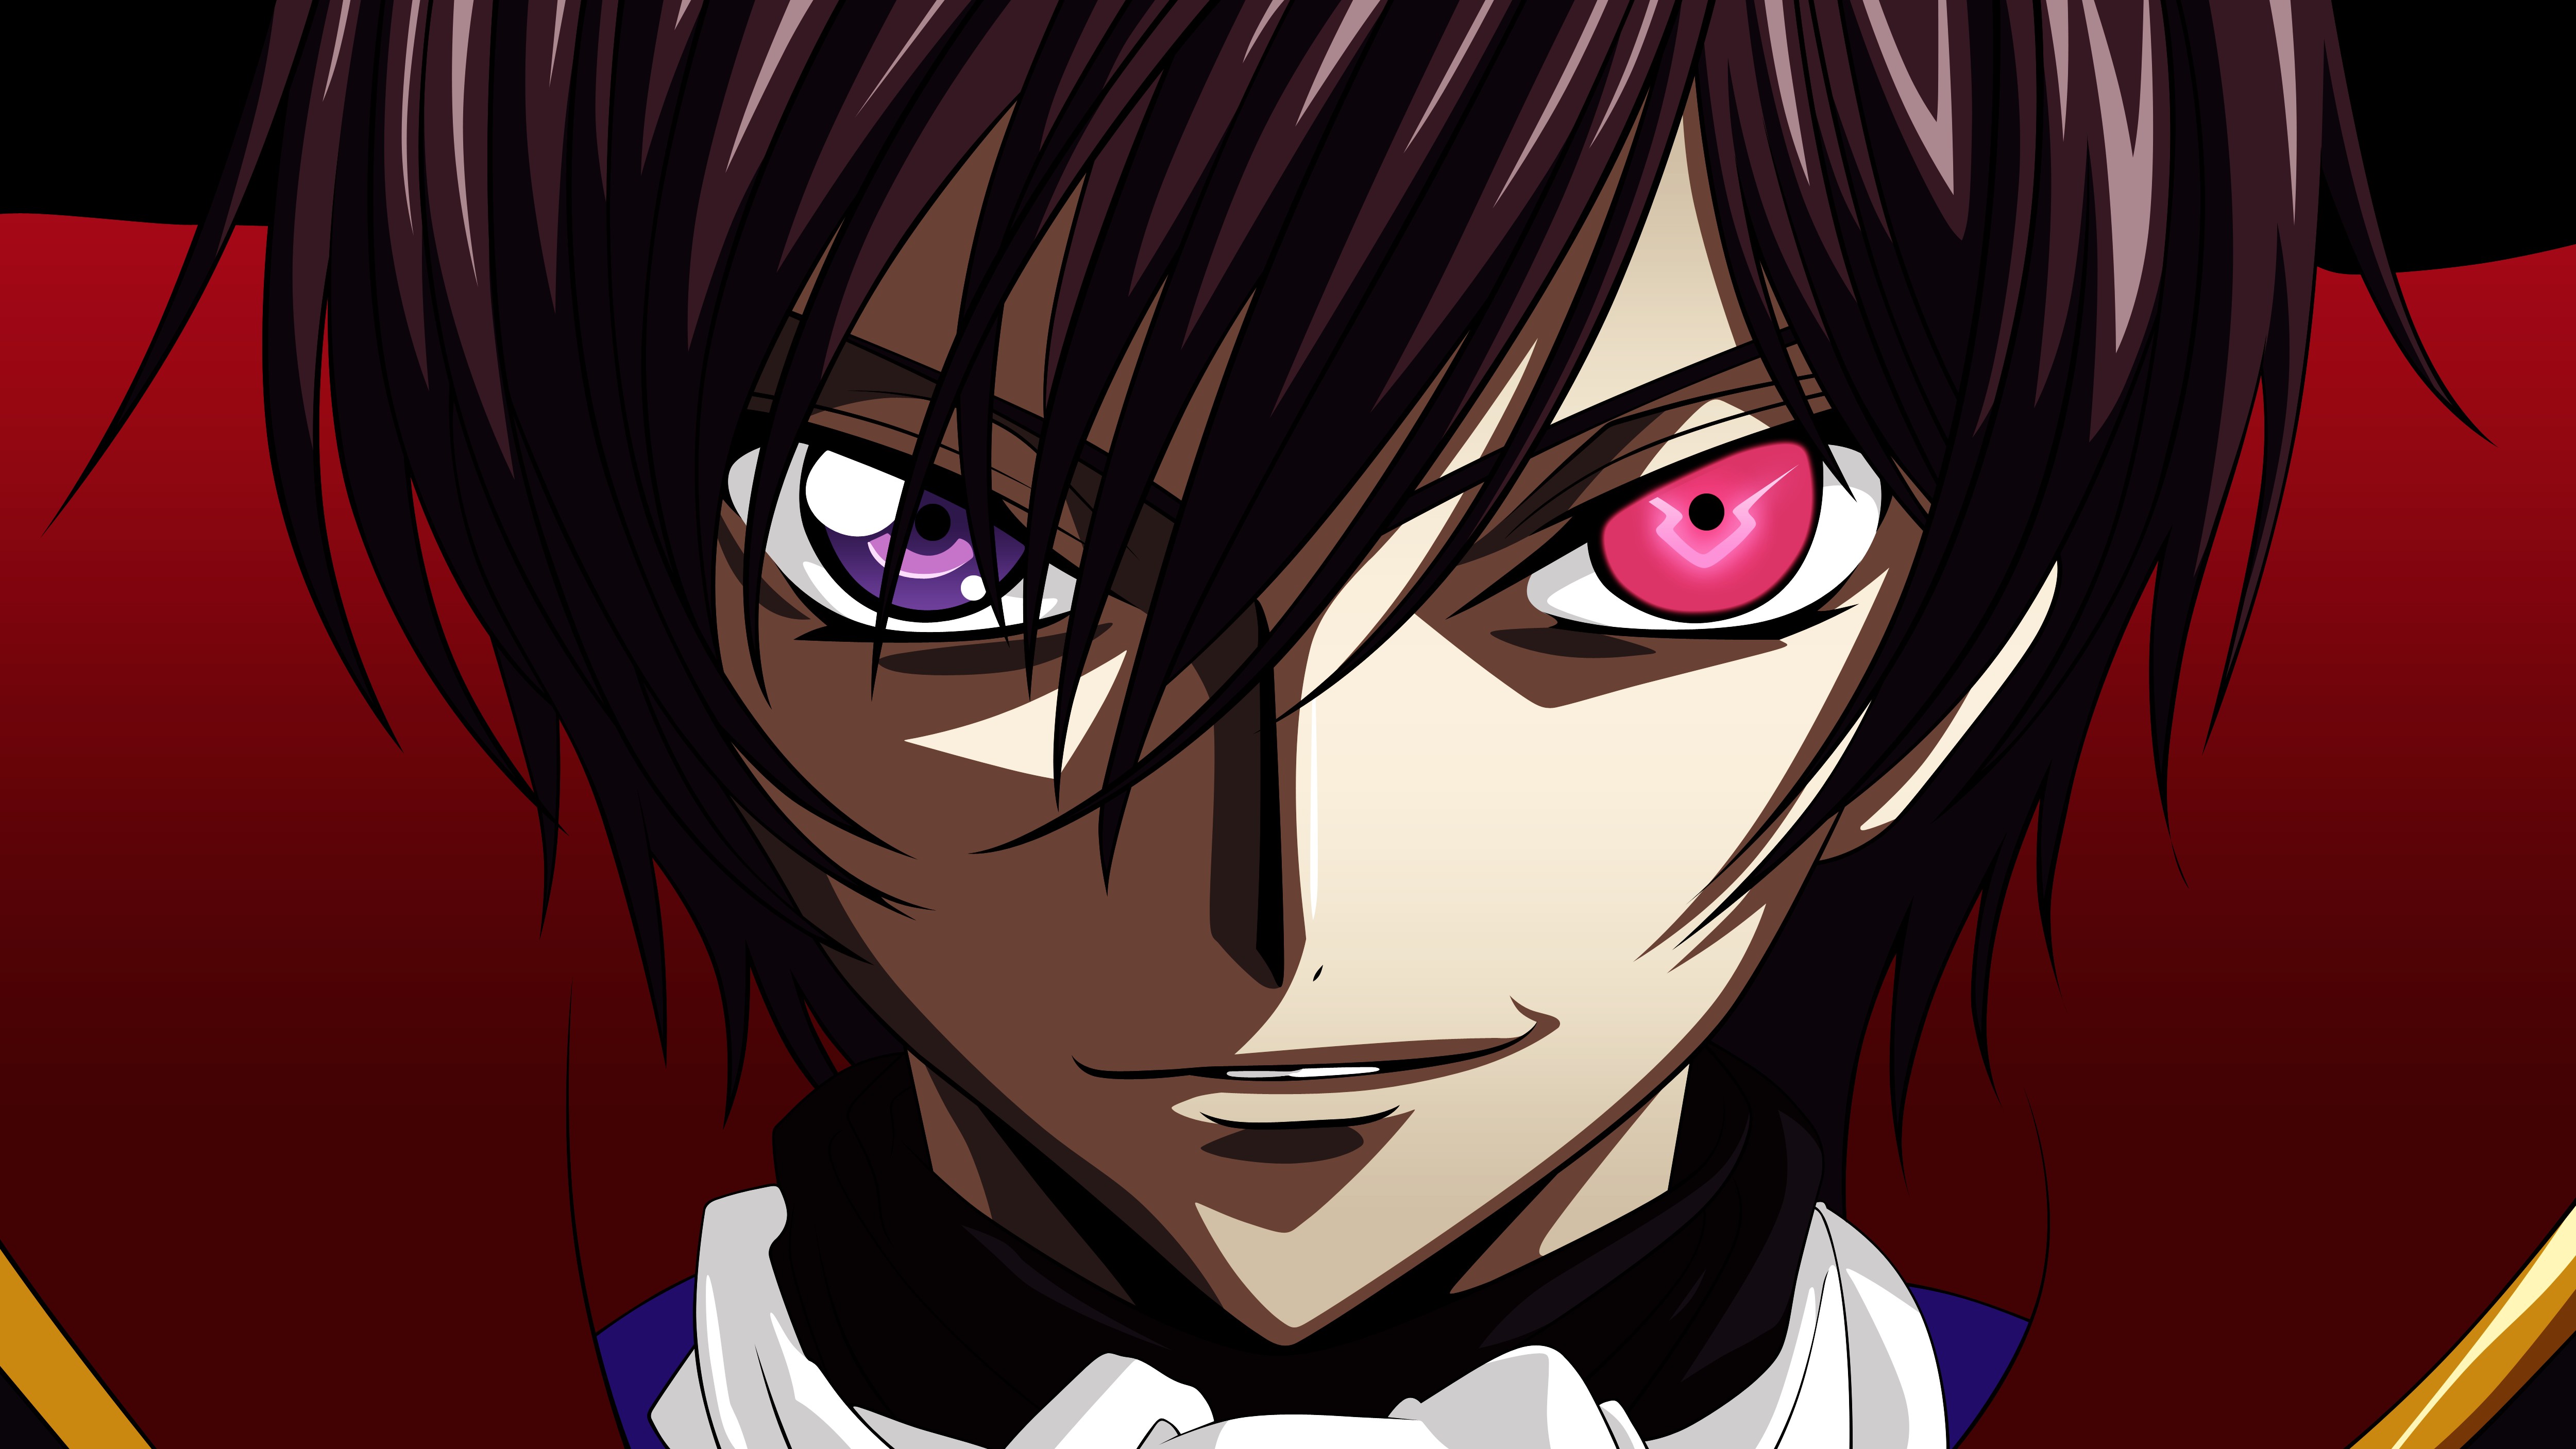 Mobile wallpaper: Anime, Lelouch Lamperouge, Code Geass, 1439065 download  the picture for free.